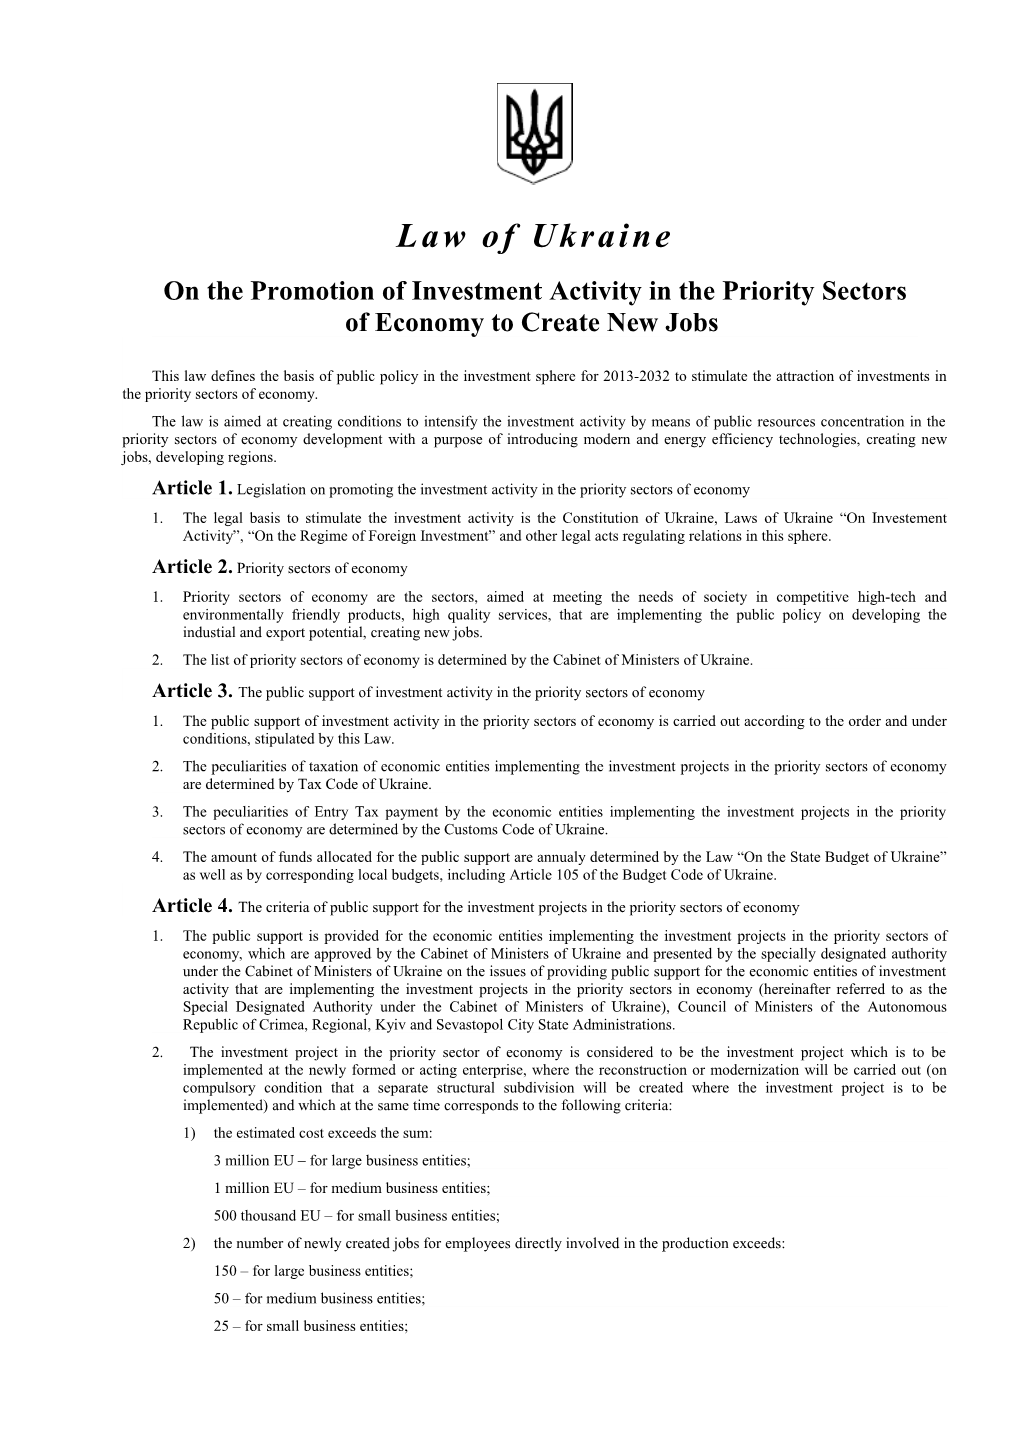 Article 1.Legislation on Promoting the Investment Activity in the Priority Sectorsof Economy